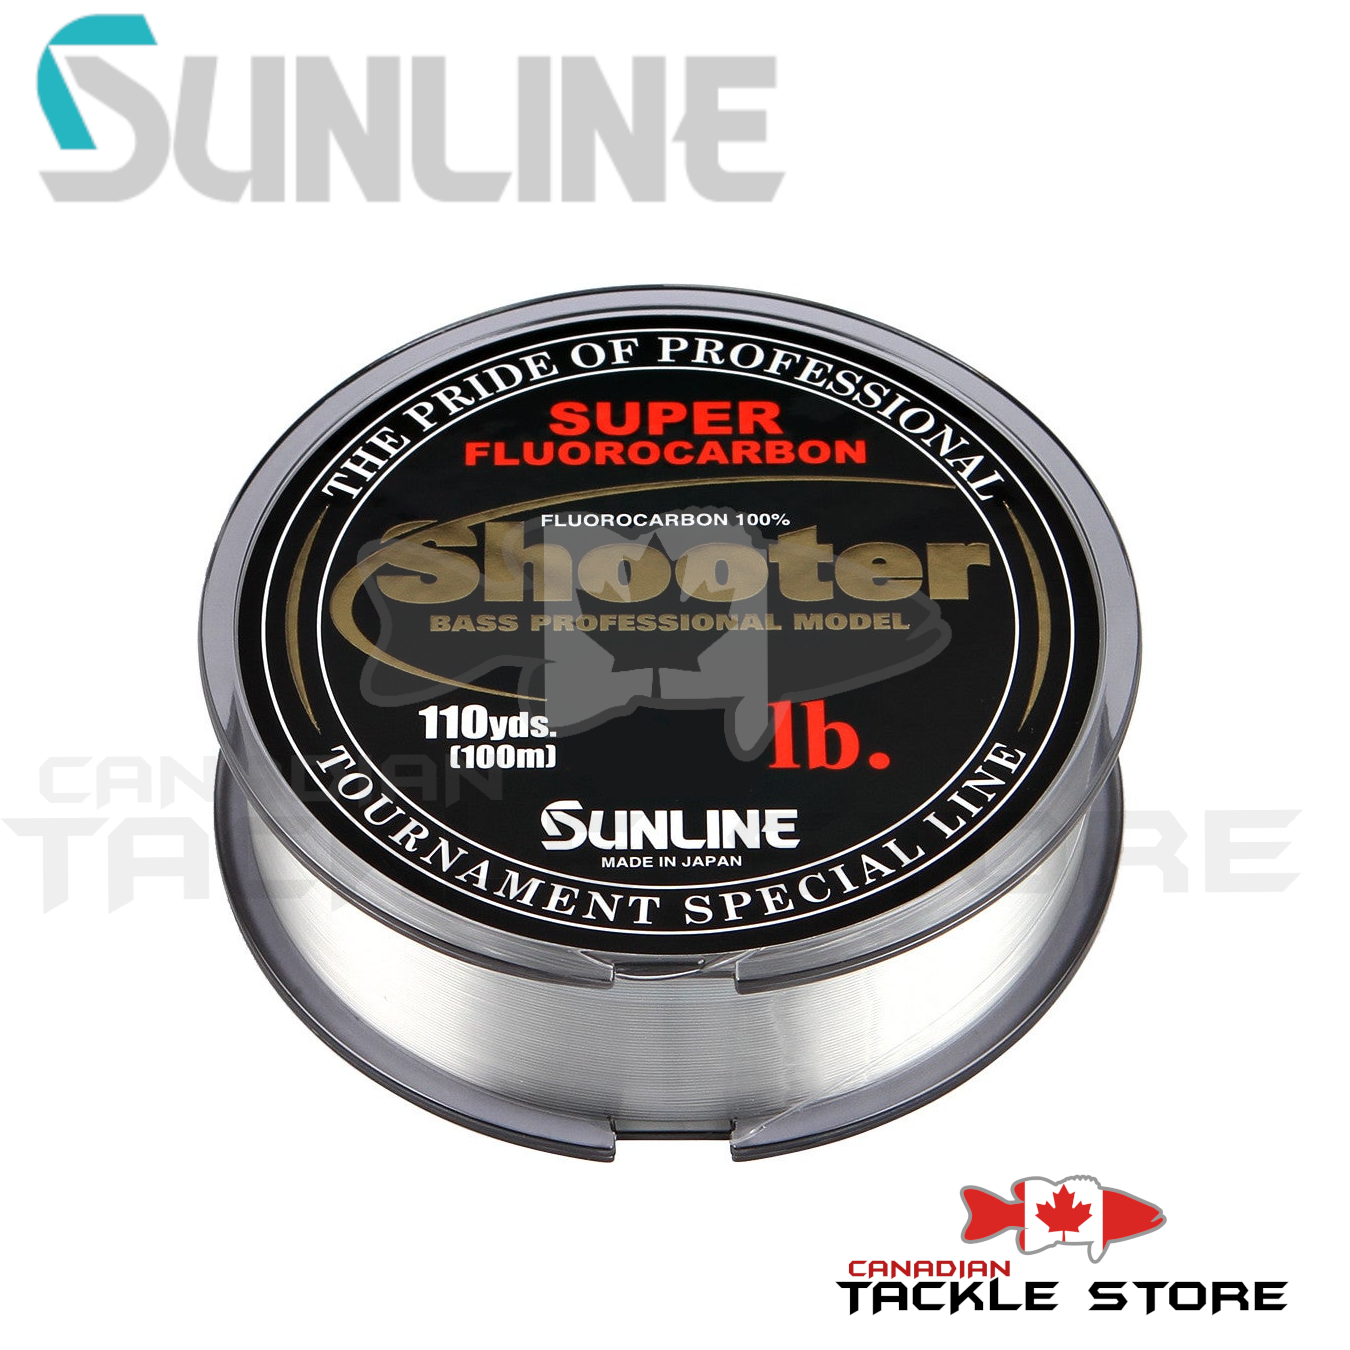 Sunline Shooter Fluorocarbon Line – Canadian Tackle Store